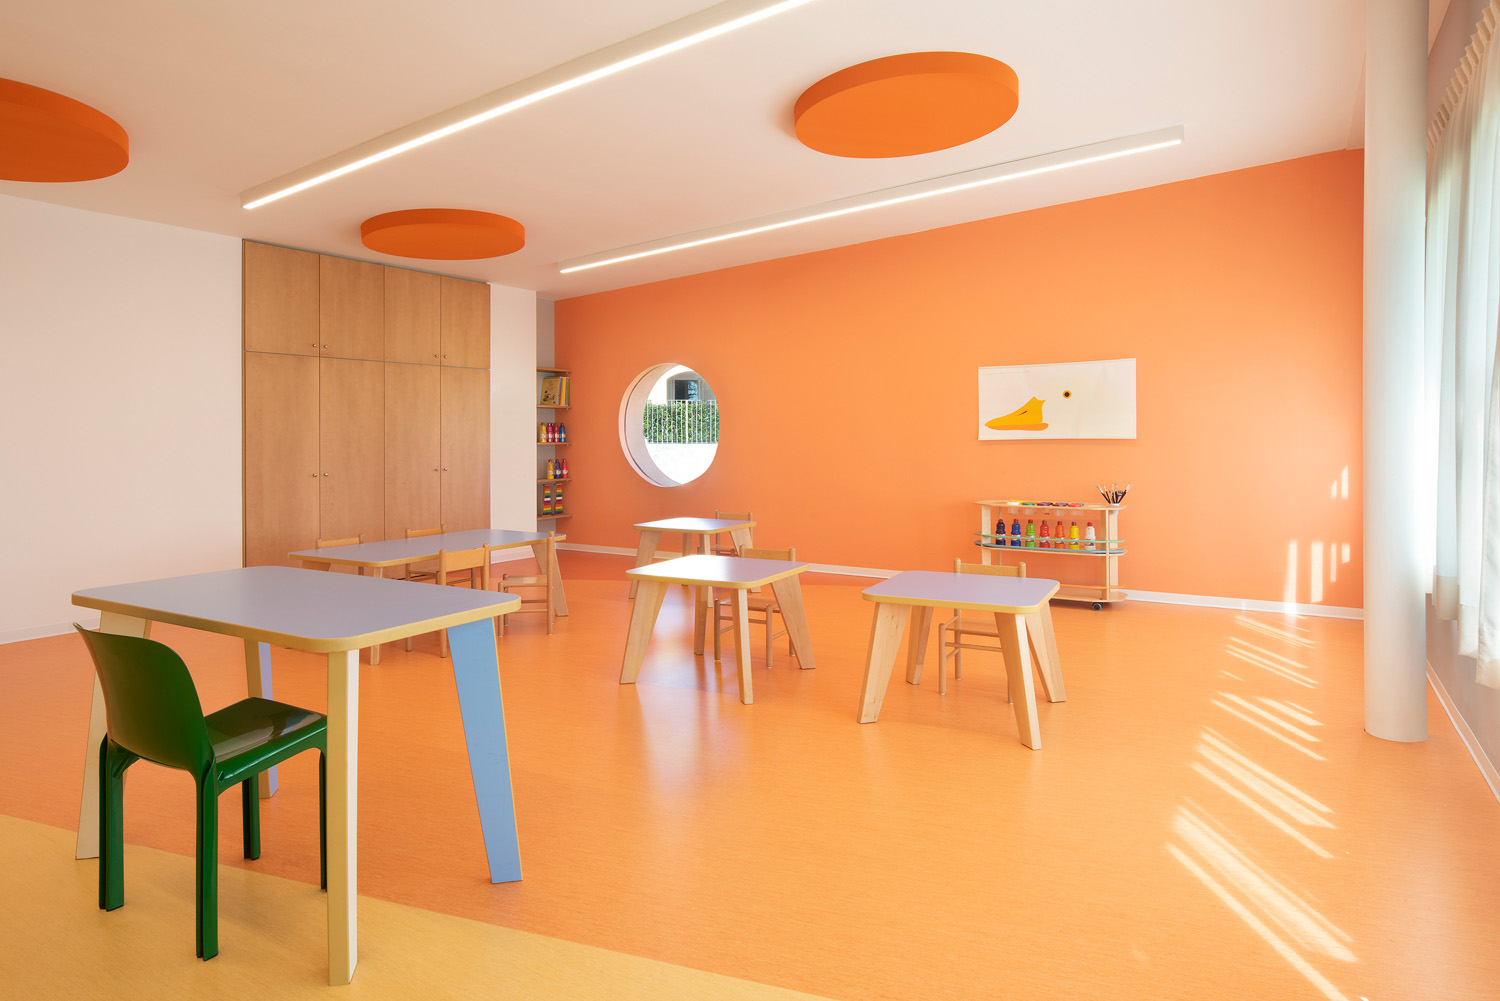 A modern, bright classroom with orange walls and floor. There are a few chairs and tables in the room. 